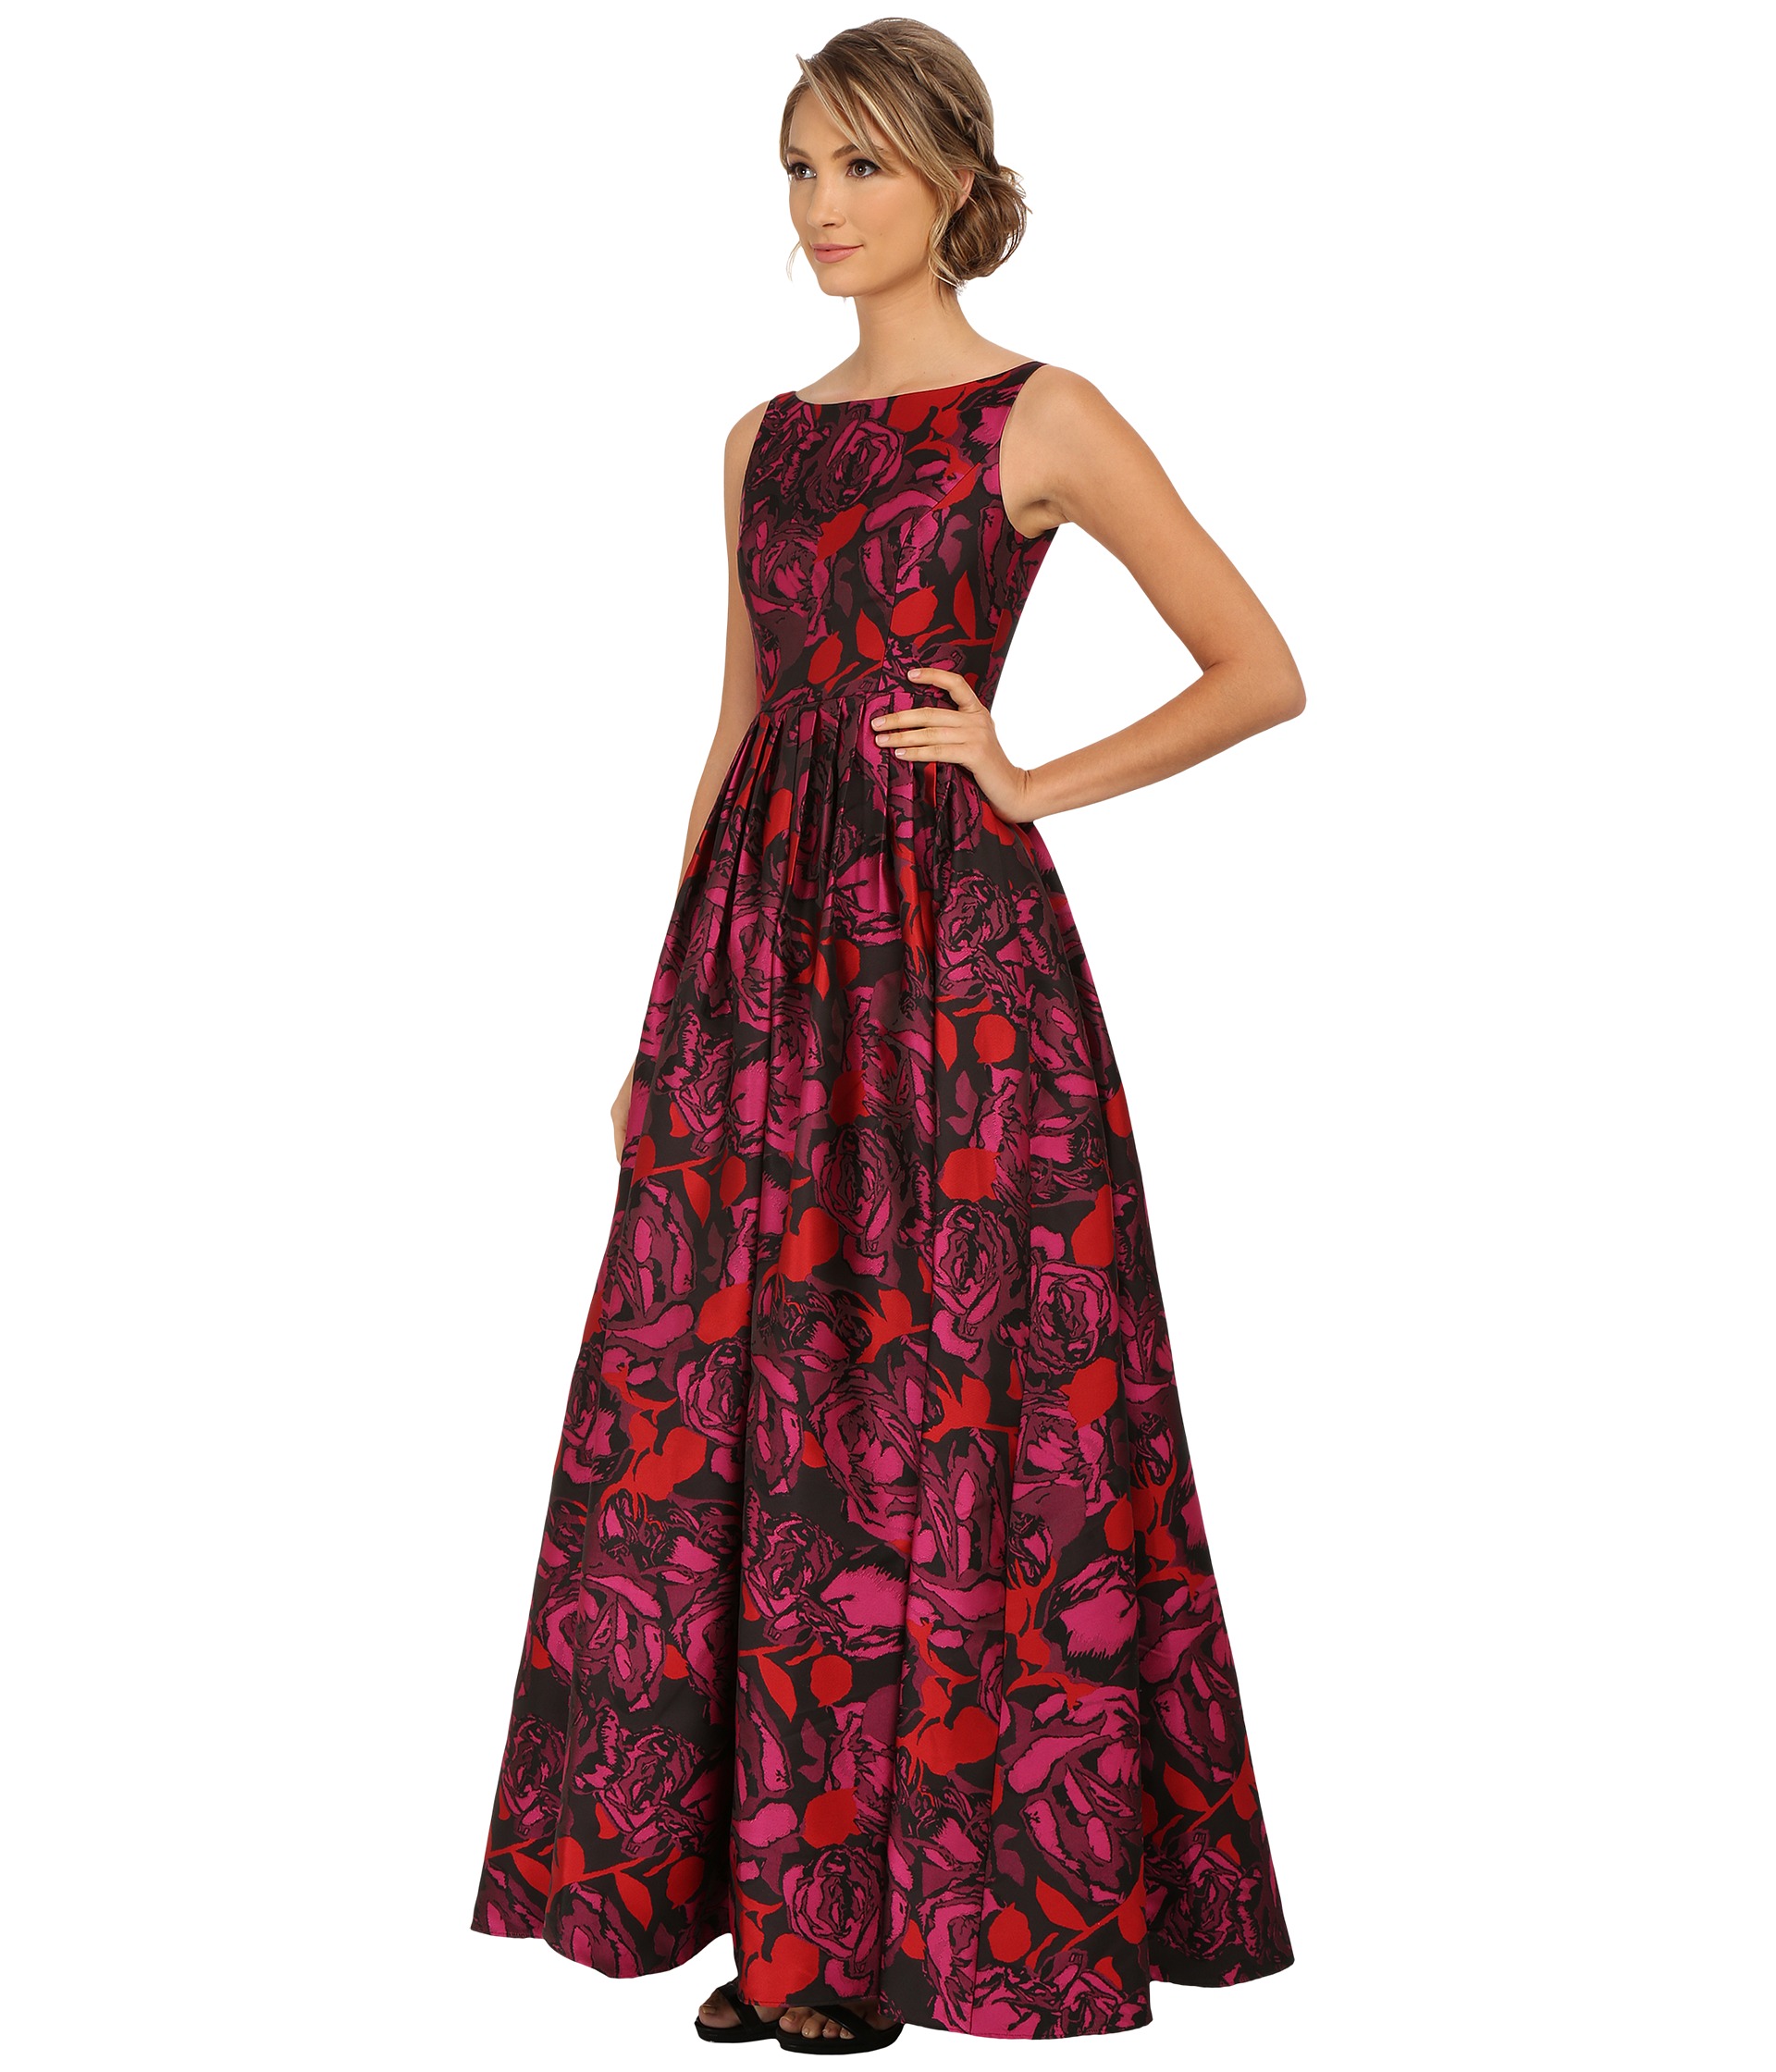 Adrianna Papell Sleeveless Floral Jacquard Ball Gown Red Multi